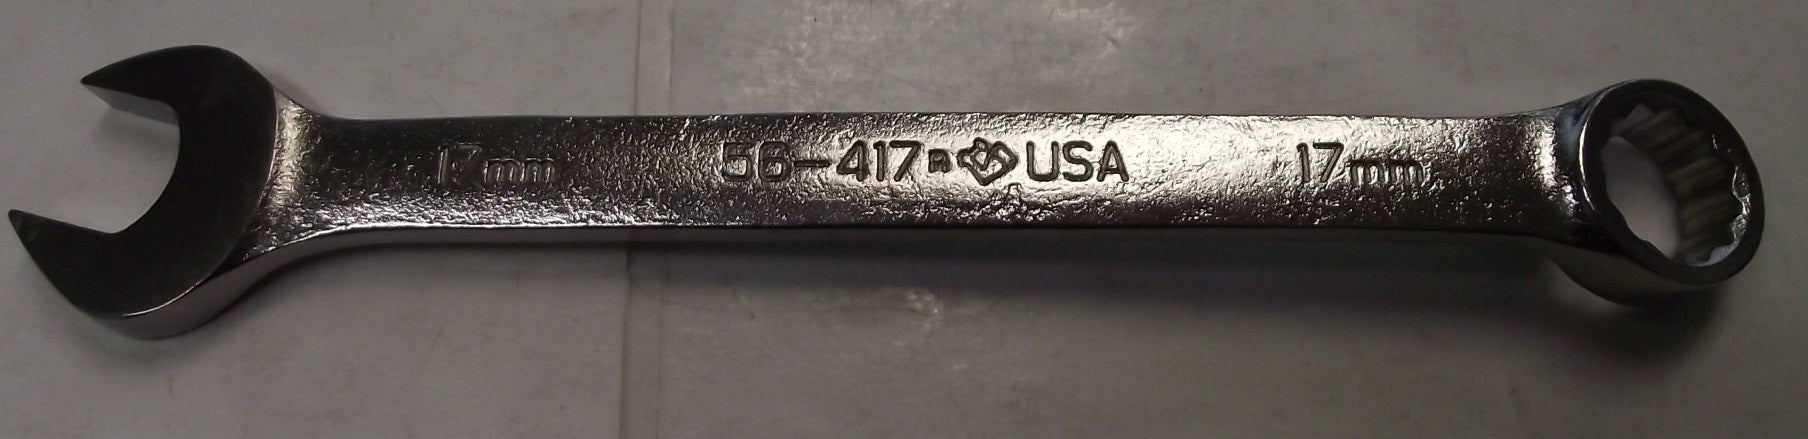 Armstrong 56-417 17mm 12 Pt Satin Combination Wrench USA